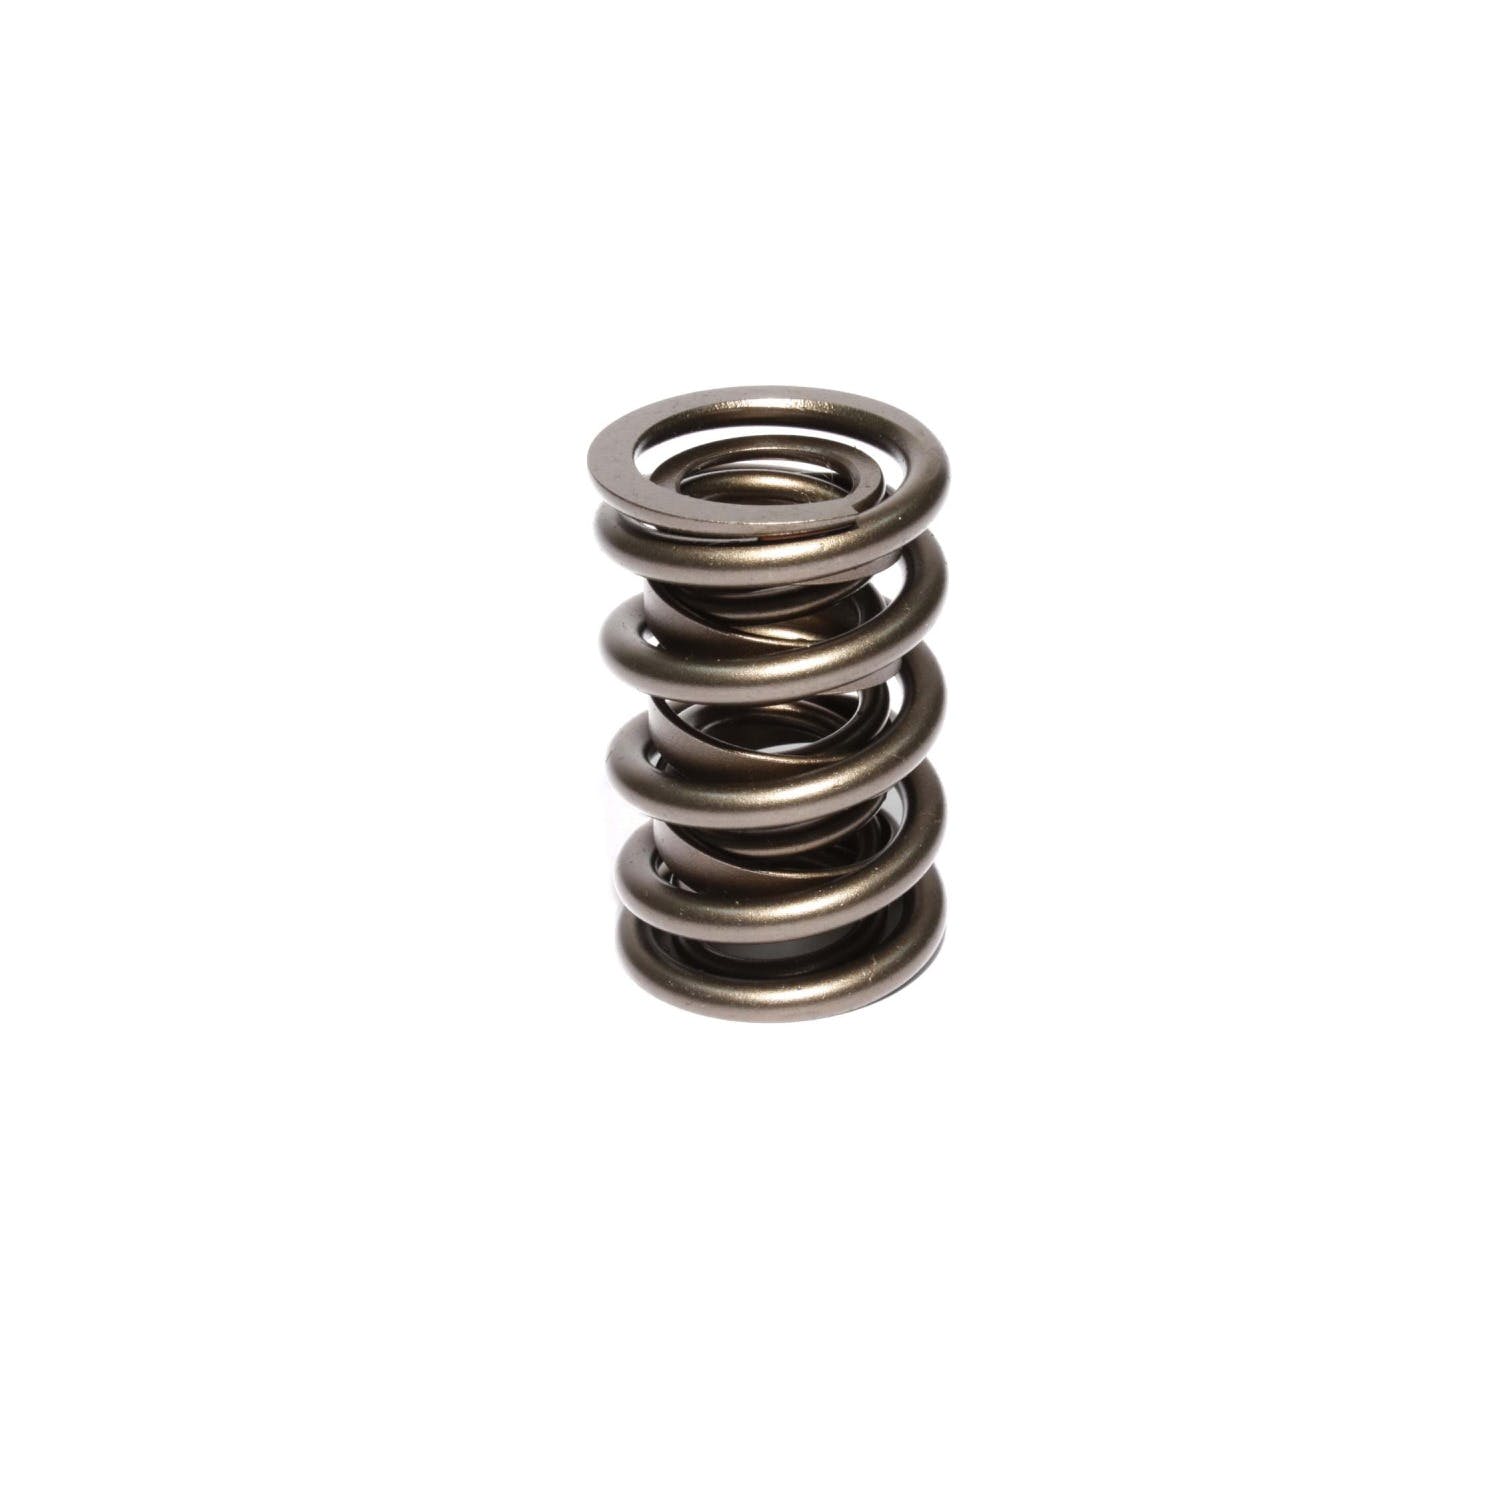 Competition Cams 928-1 Dual Valve Spring Assemblies Valve Springs